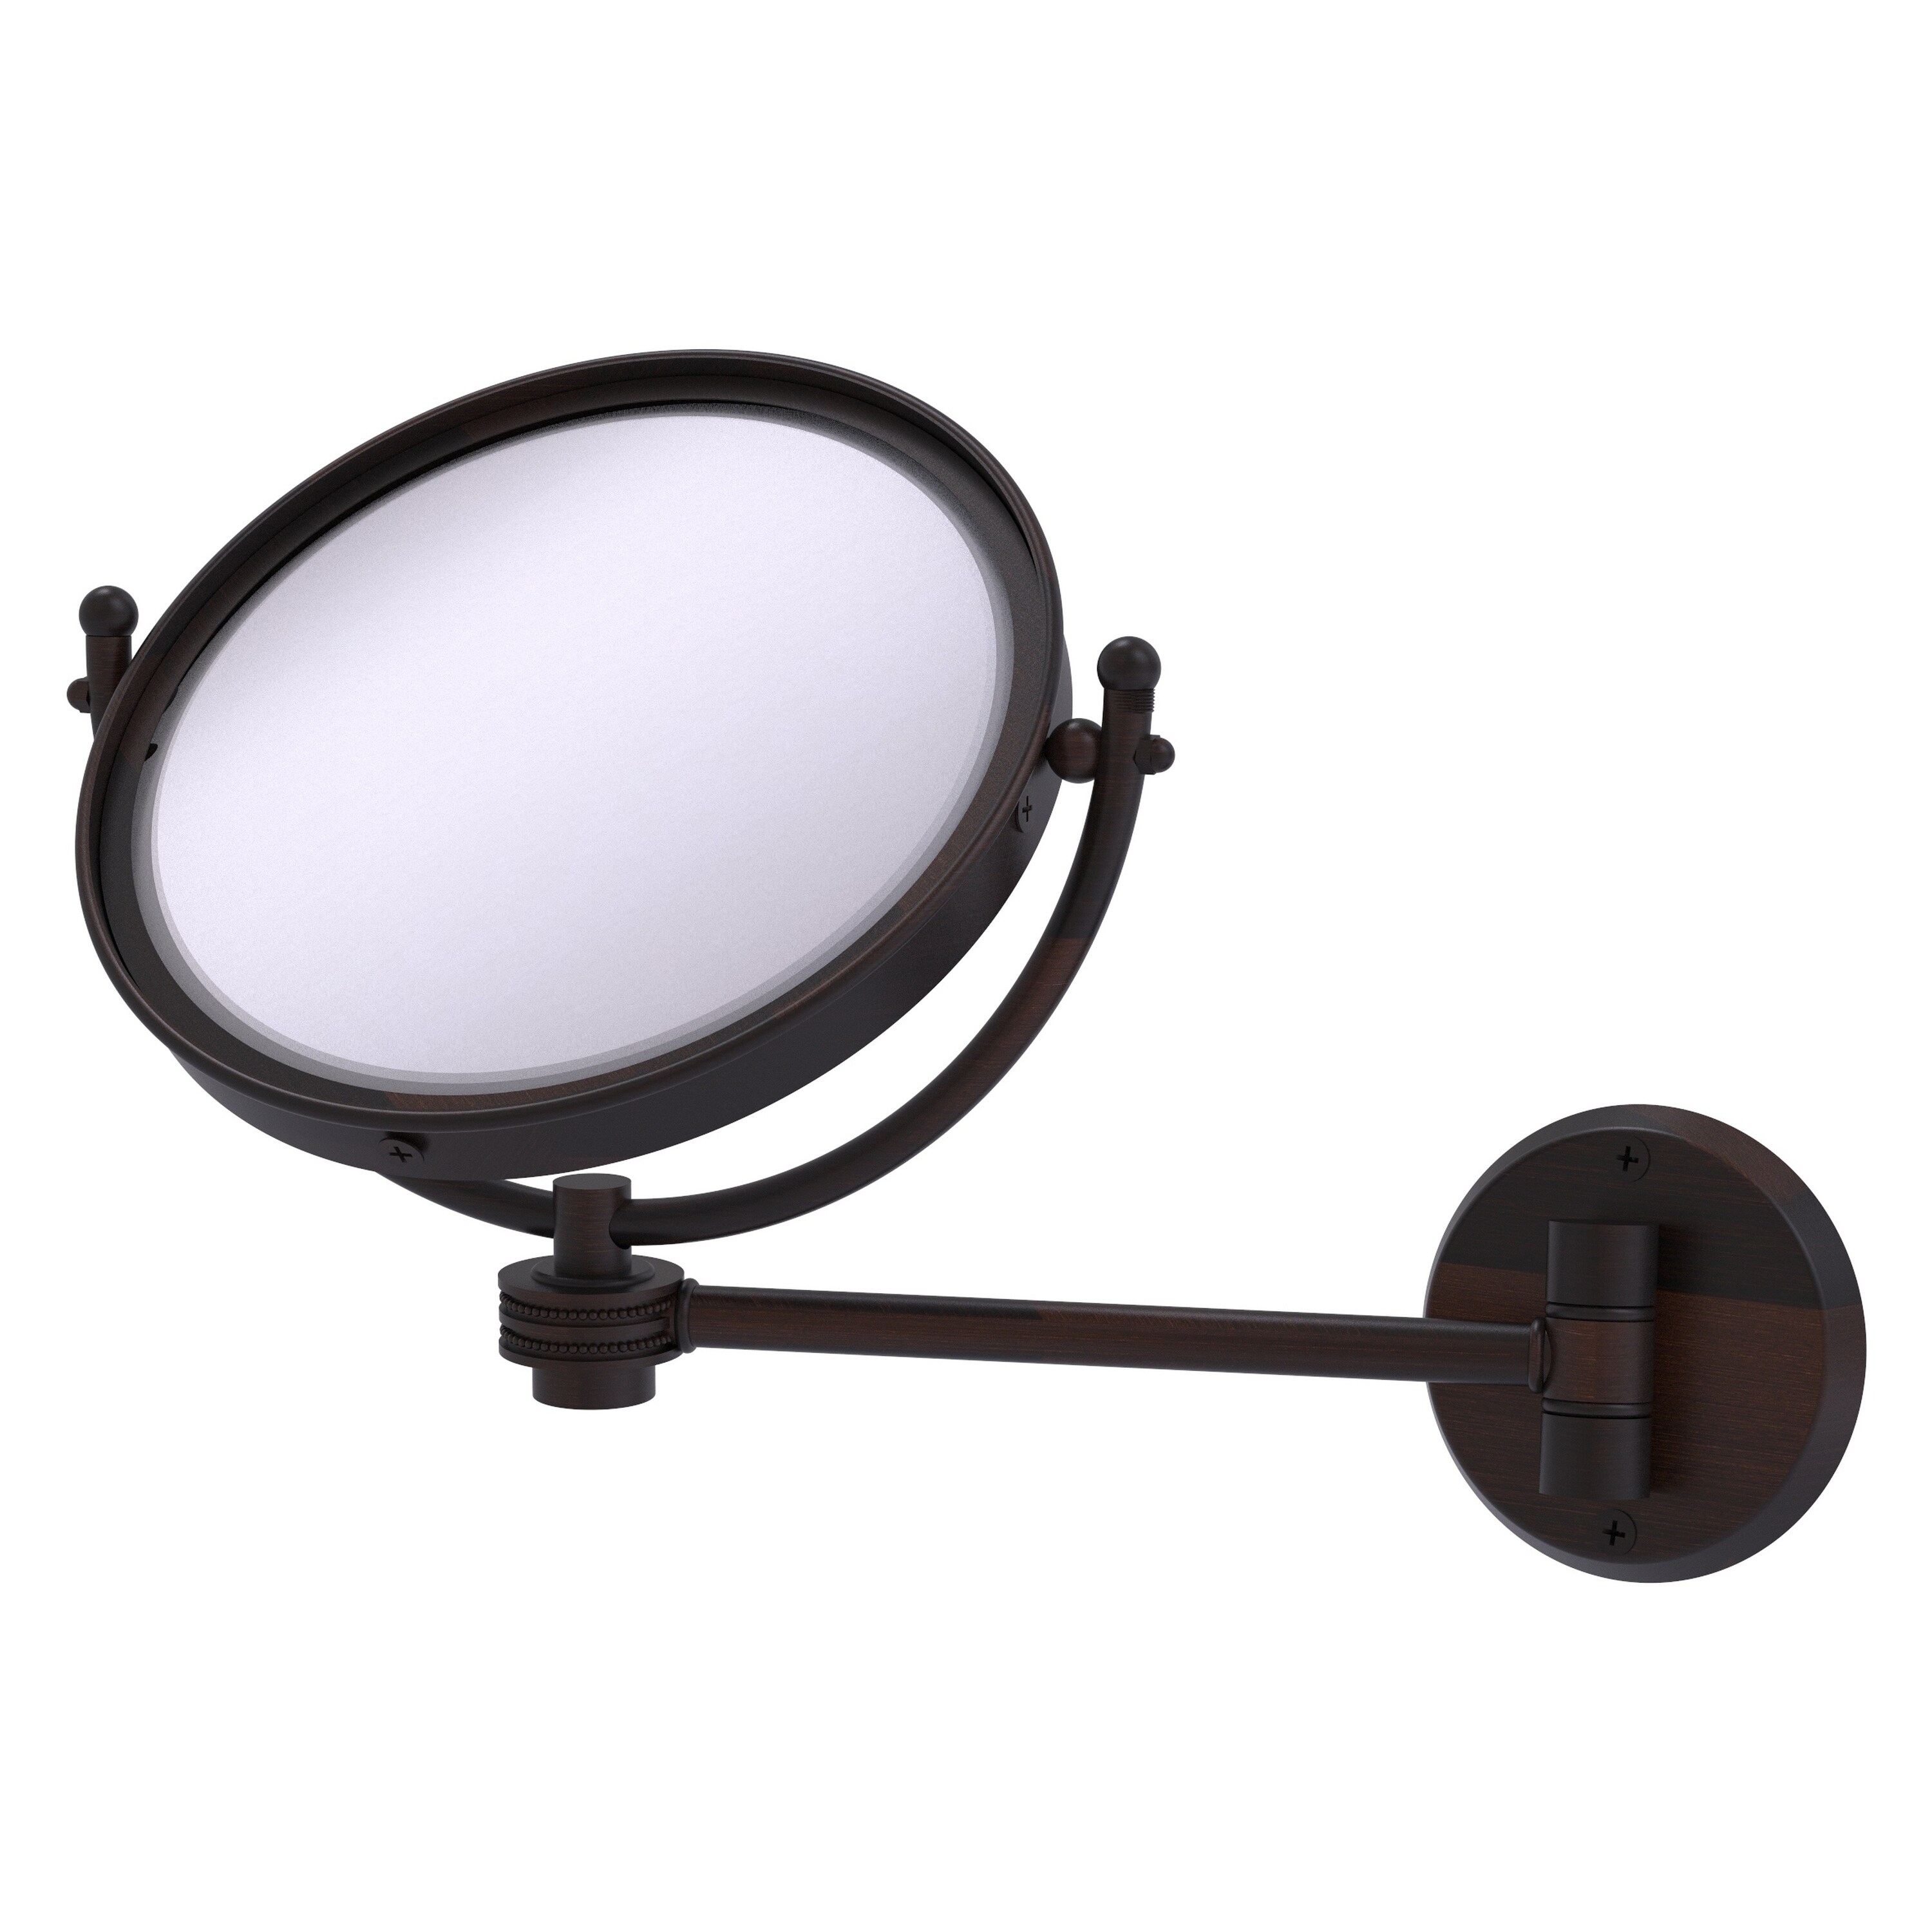 8-in x 10-in Distressed White Double-sided 3X Magnifying Wall-mounted Vanity Mirror | - Allied Brass WM-5T/3X-VB